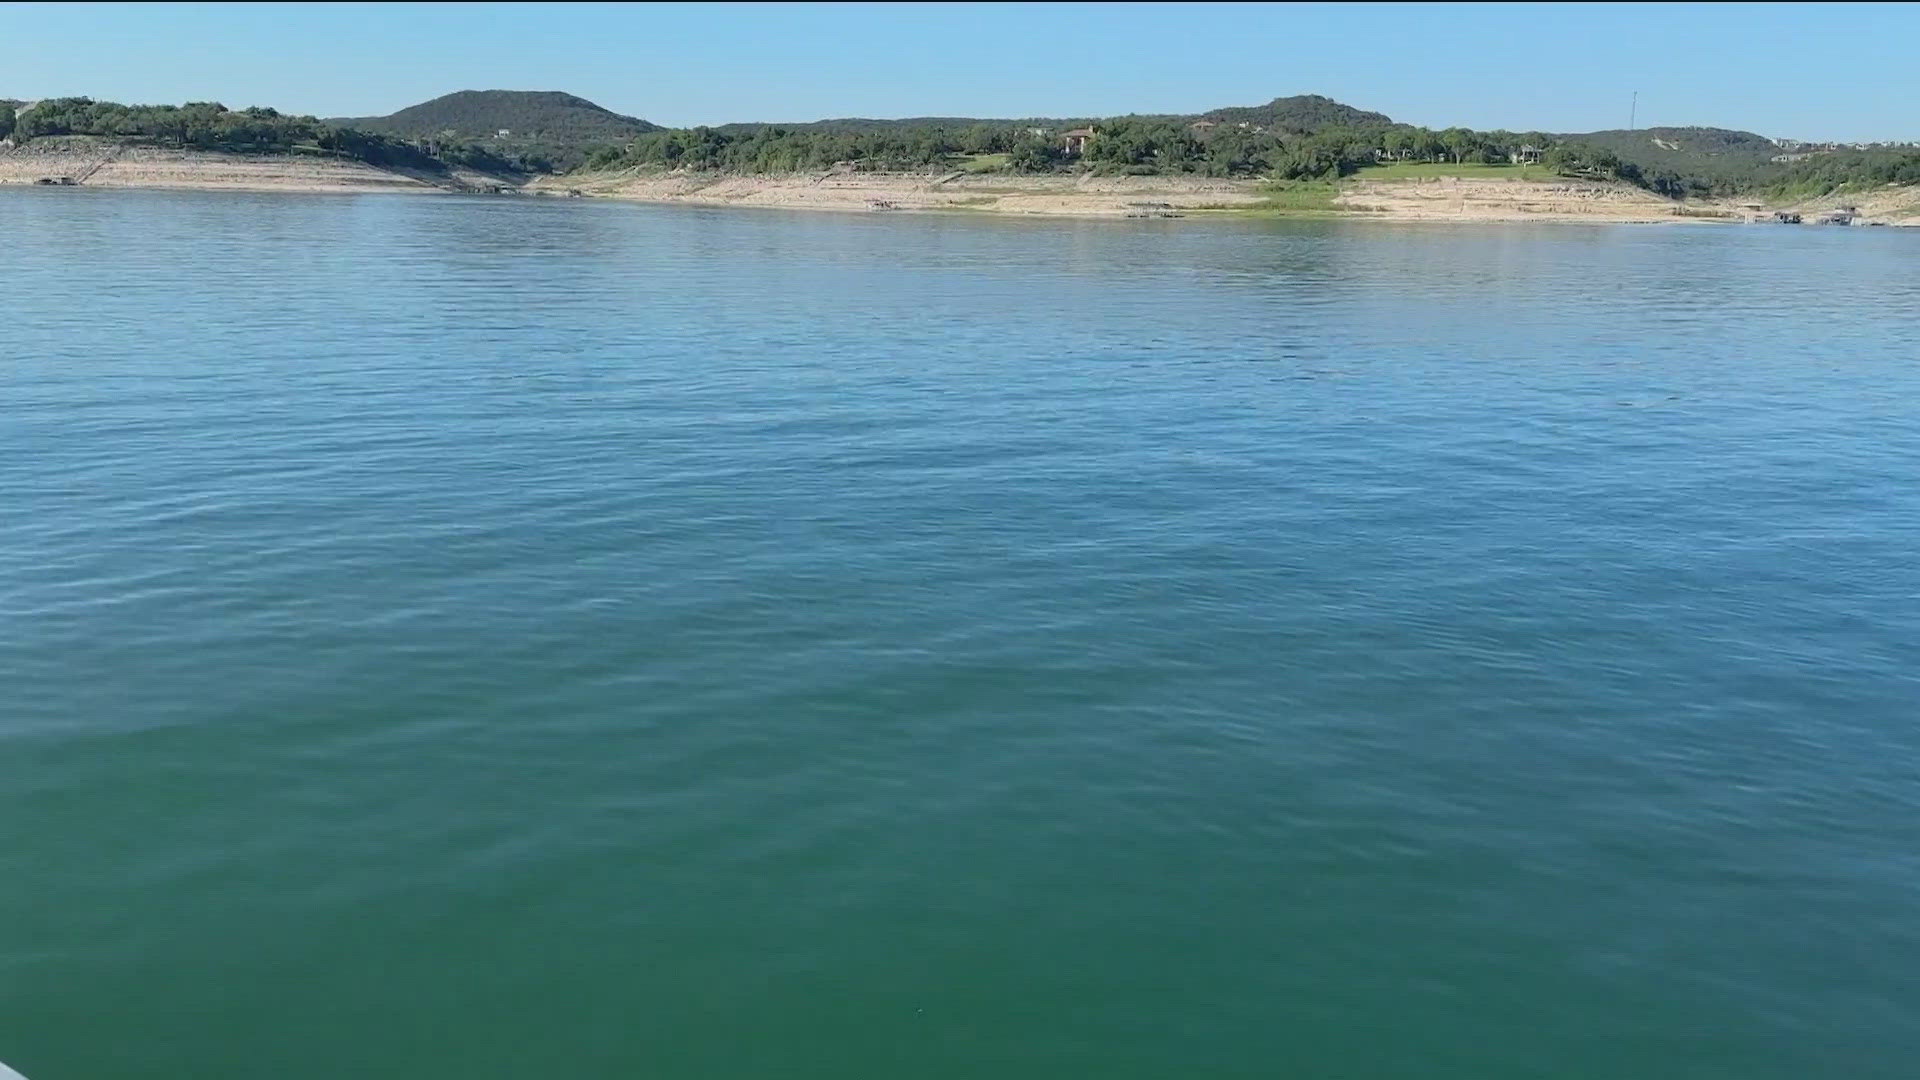 Central Texas has seen a good amount of rain recently, but has it been enough to fill our lakes? KVUE went to Lake Travis to find out.